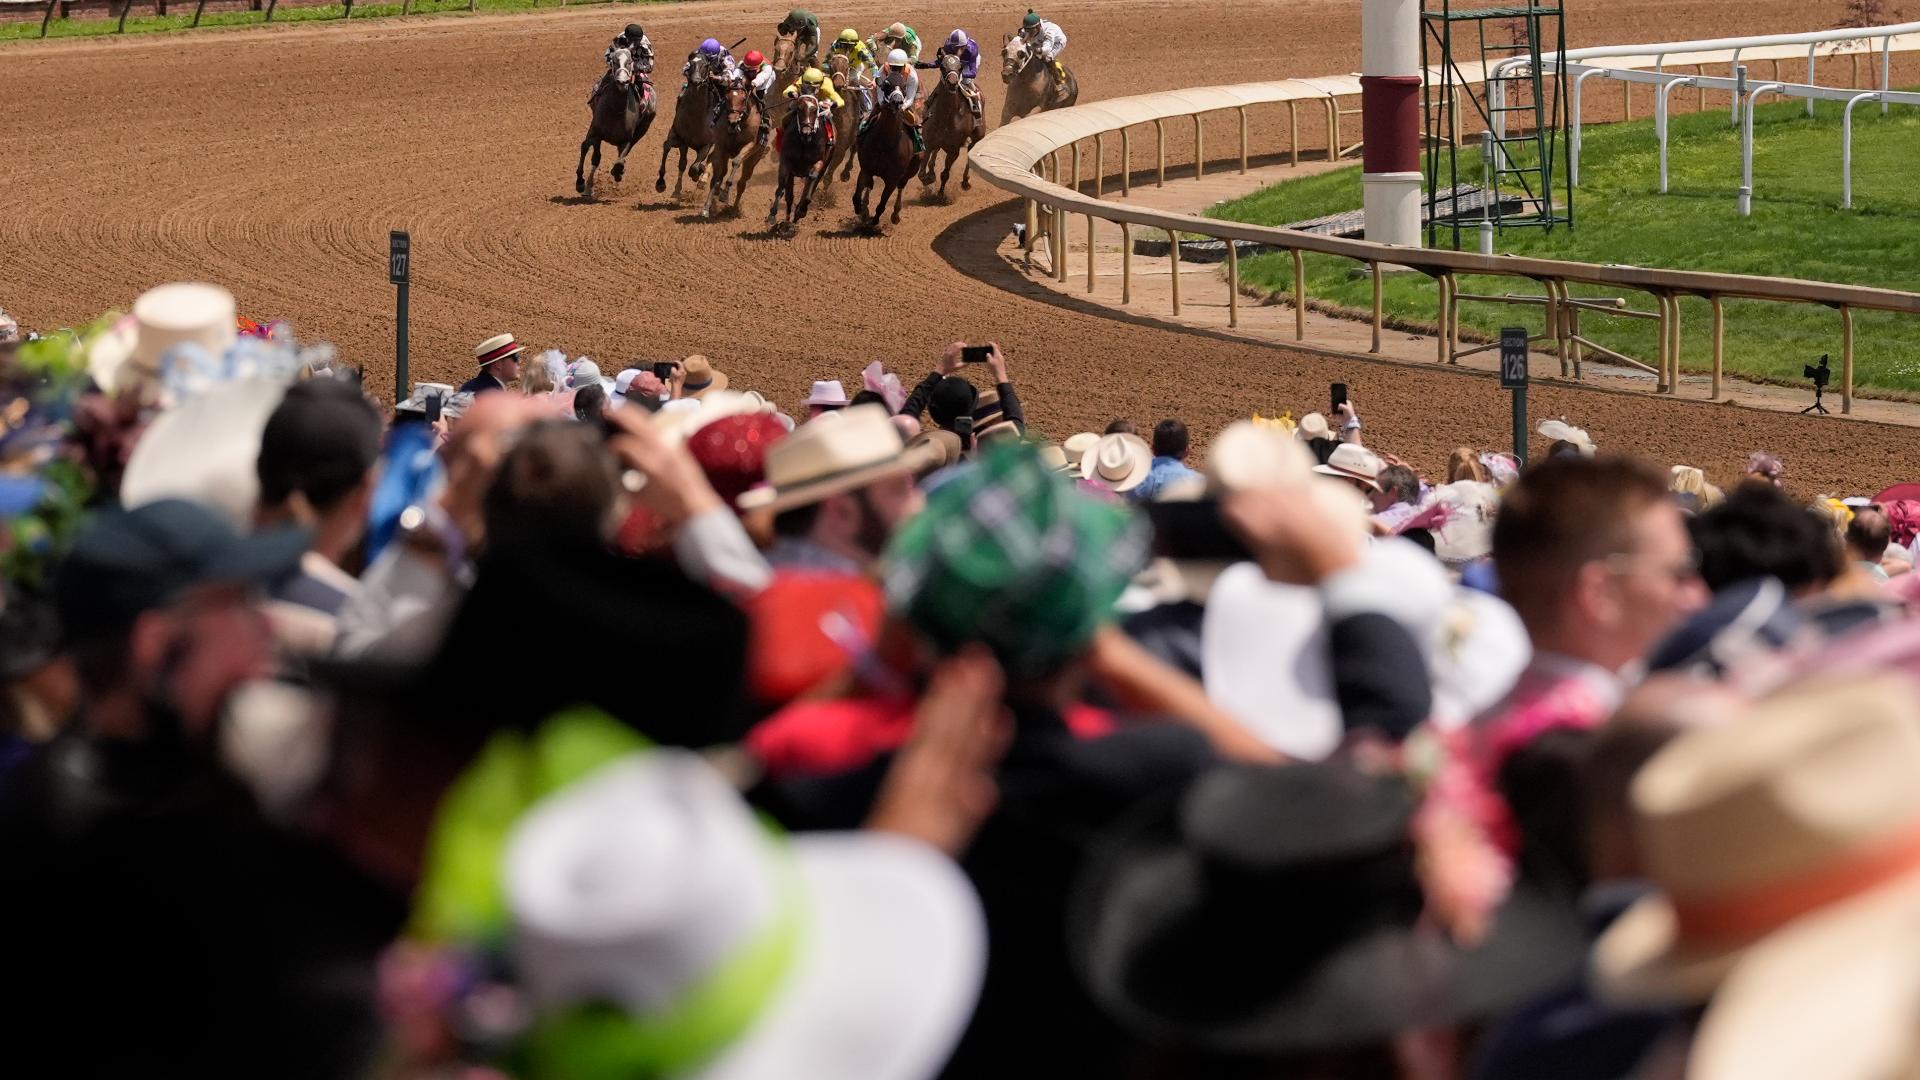 People bet a total of $708.3 million during the spring meet season.